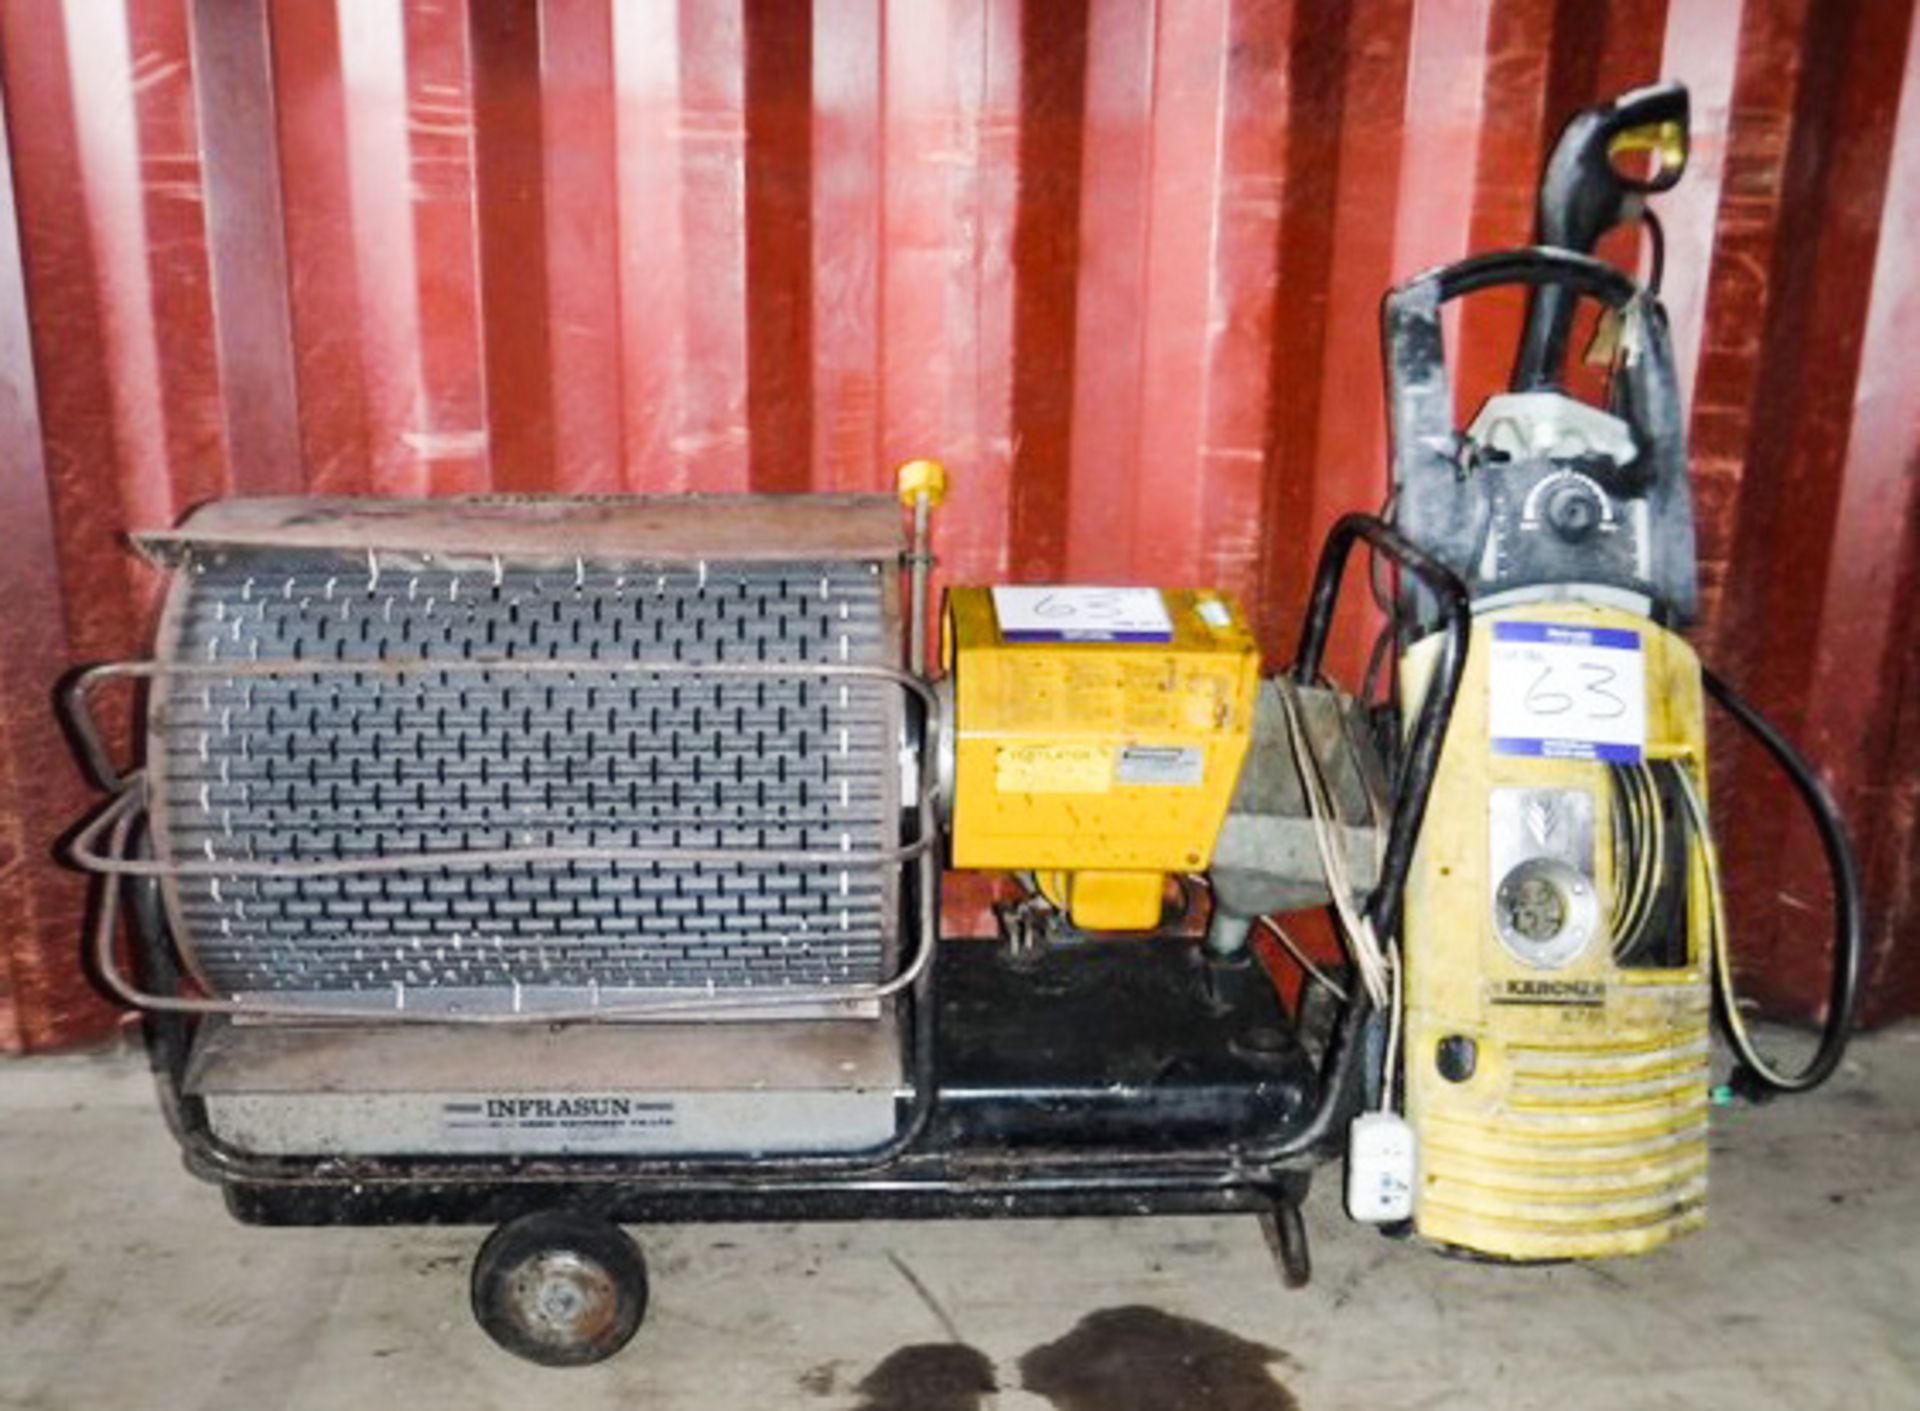 YOUNGMAN DIESEL WORKSHOP HEATER & KARCHER K7.85 (FOR SPARES OR REPAIRS) - Image 2 of 4